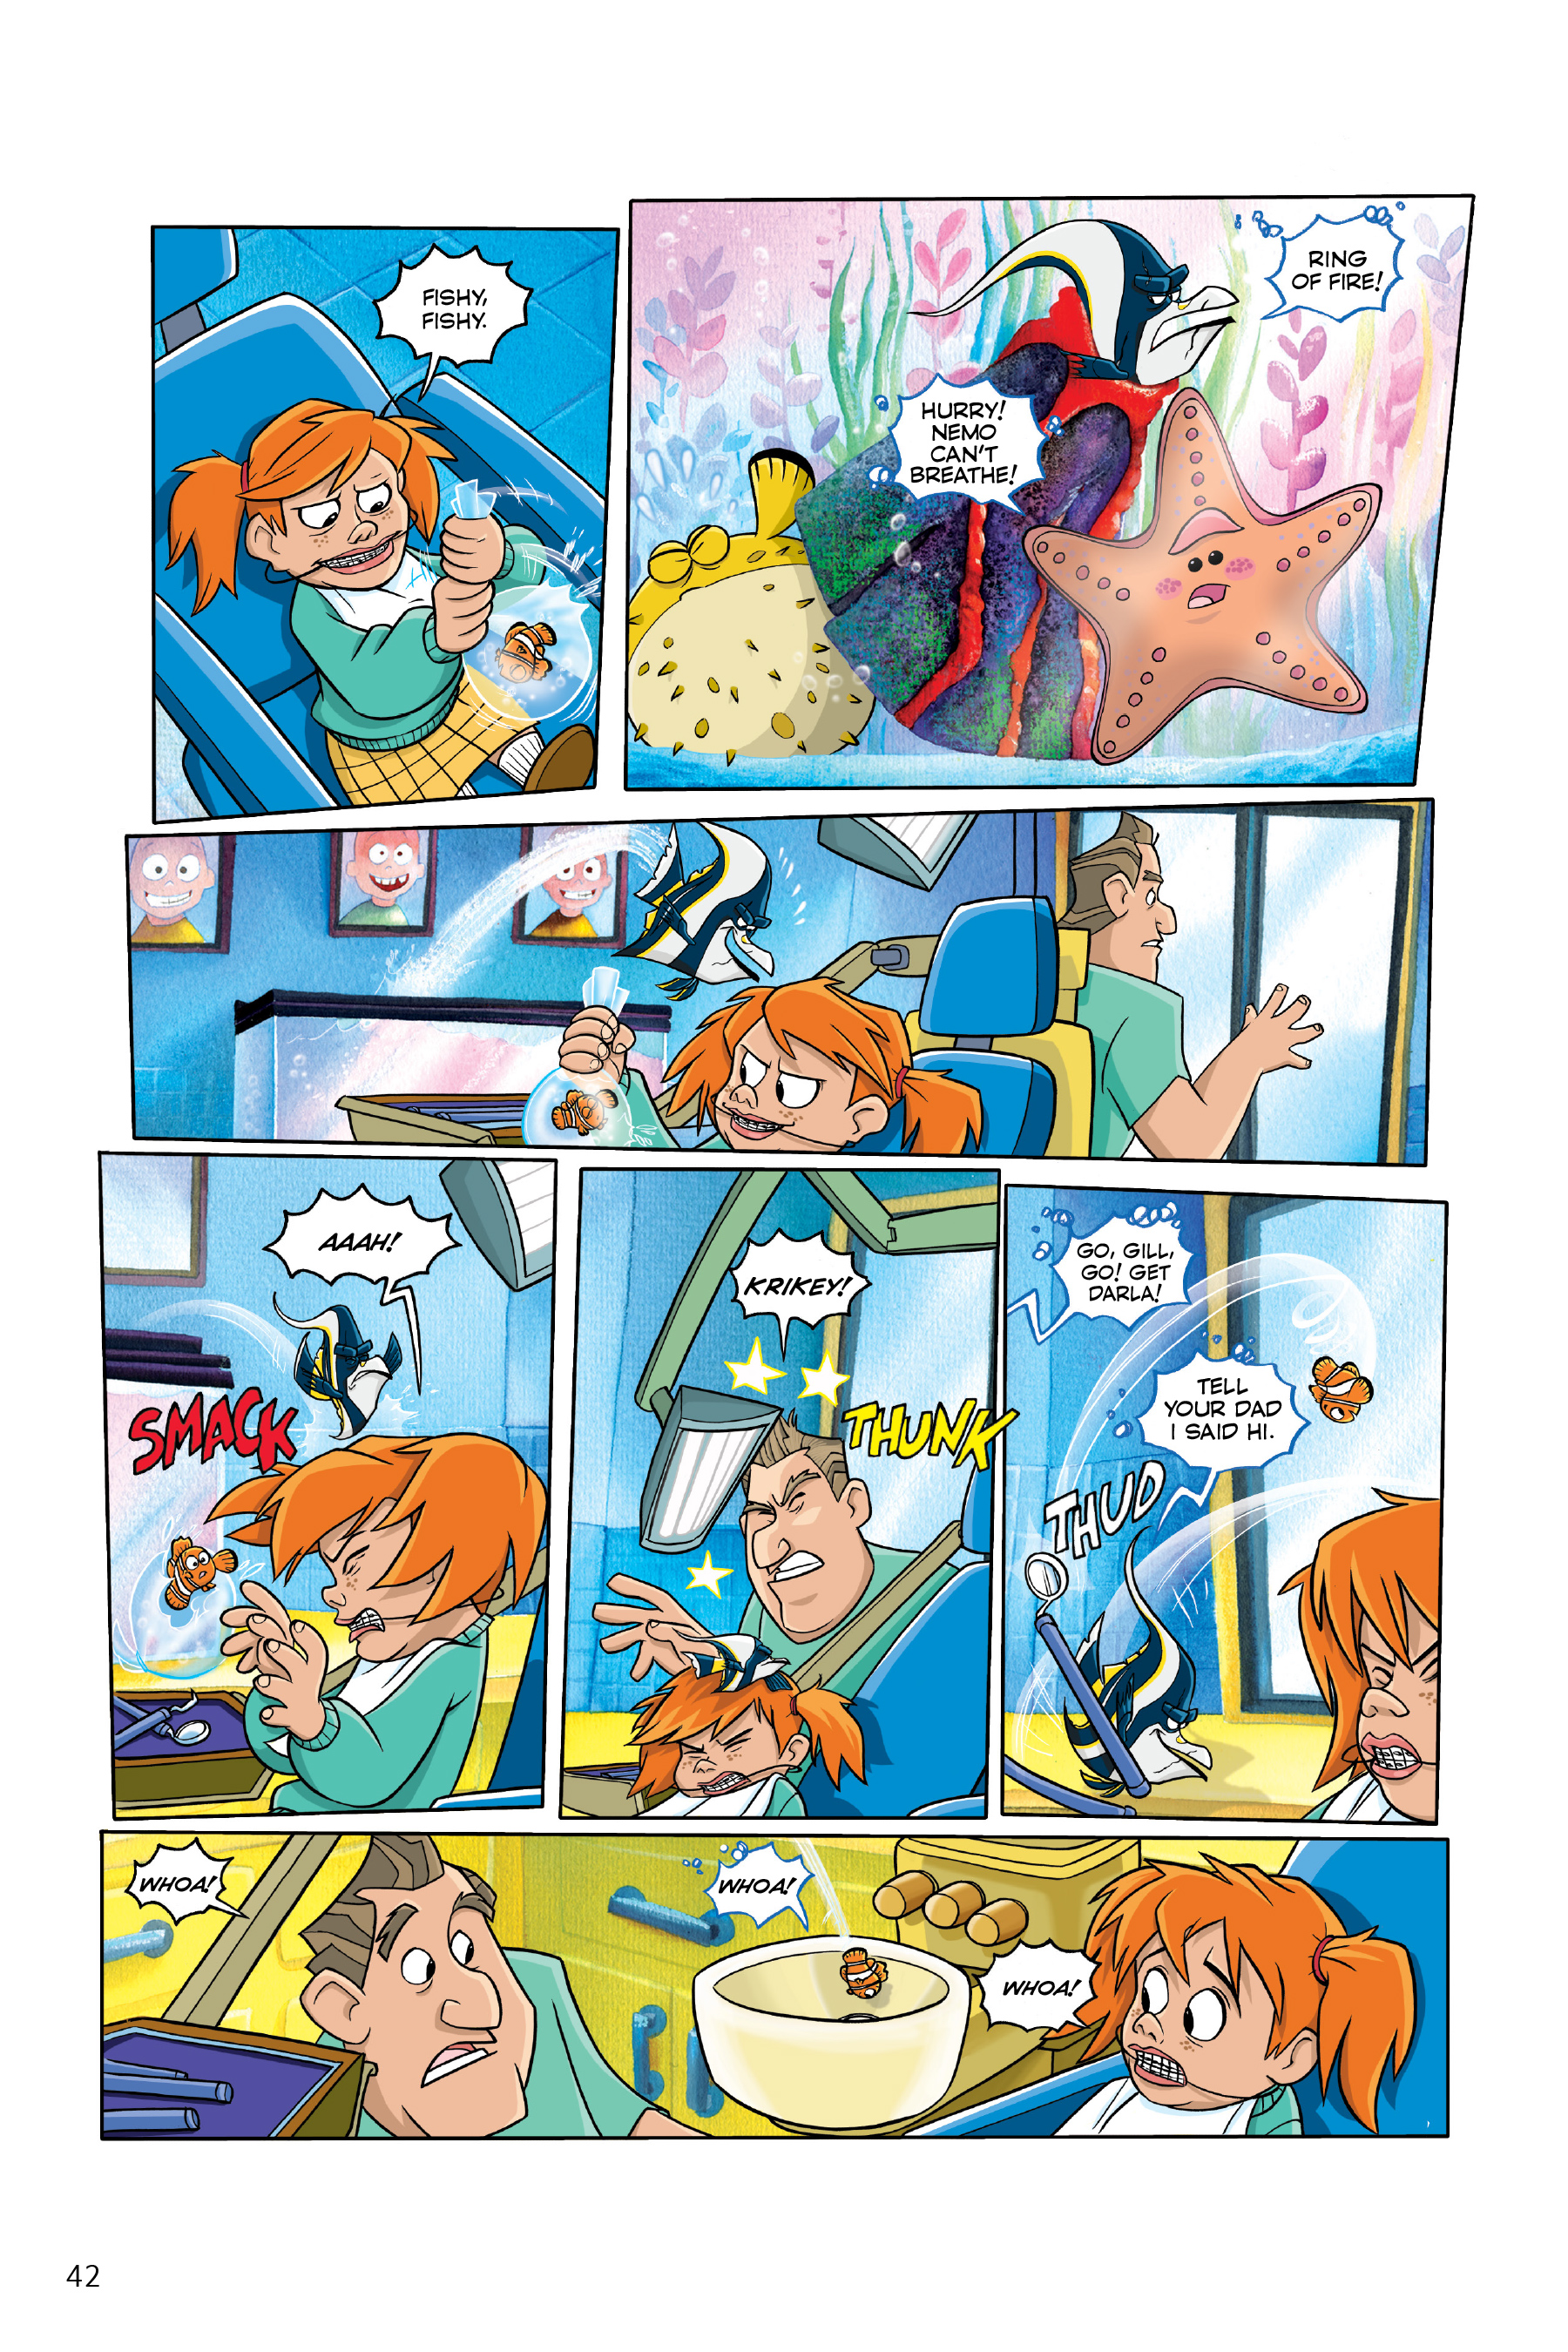 Finding Nemo Porn Comic - Disney Pixar Finding Nemo And Finding Dory The Story Of The Movies In Comics  Tpb | Read Disney Pixar Finding Nemo And Finding Dory The Story Of The  Movies In Comics Tpb